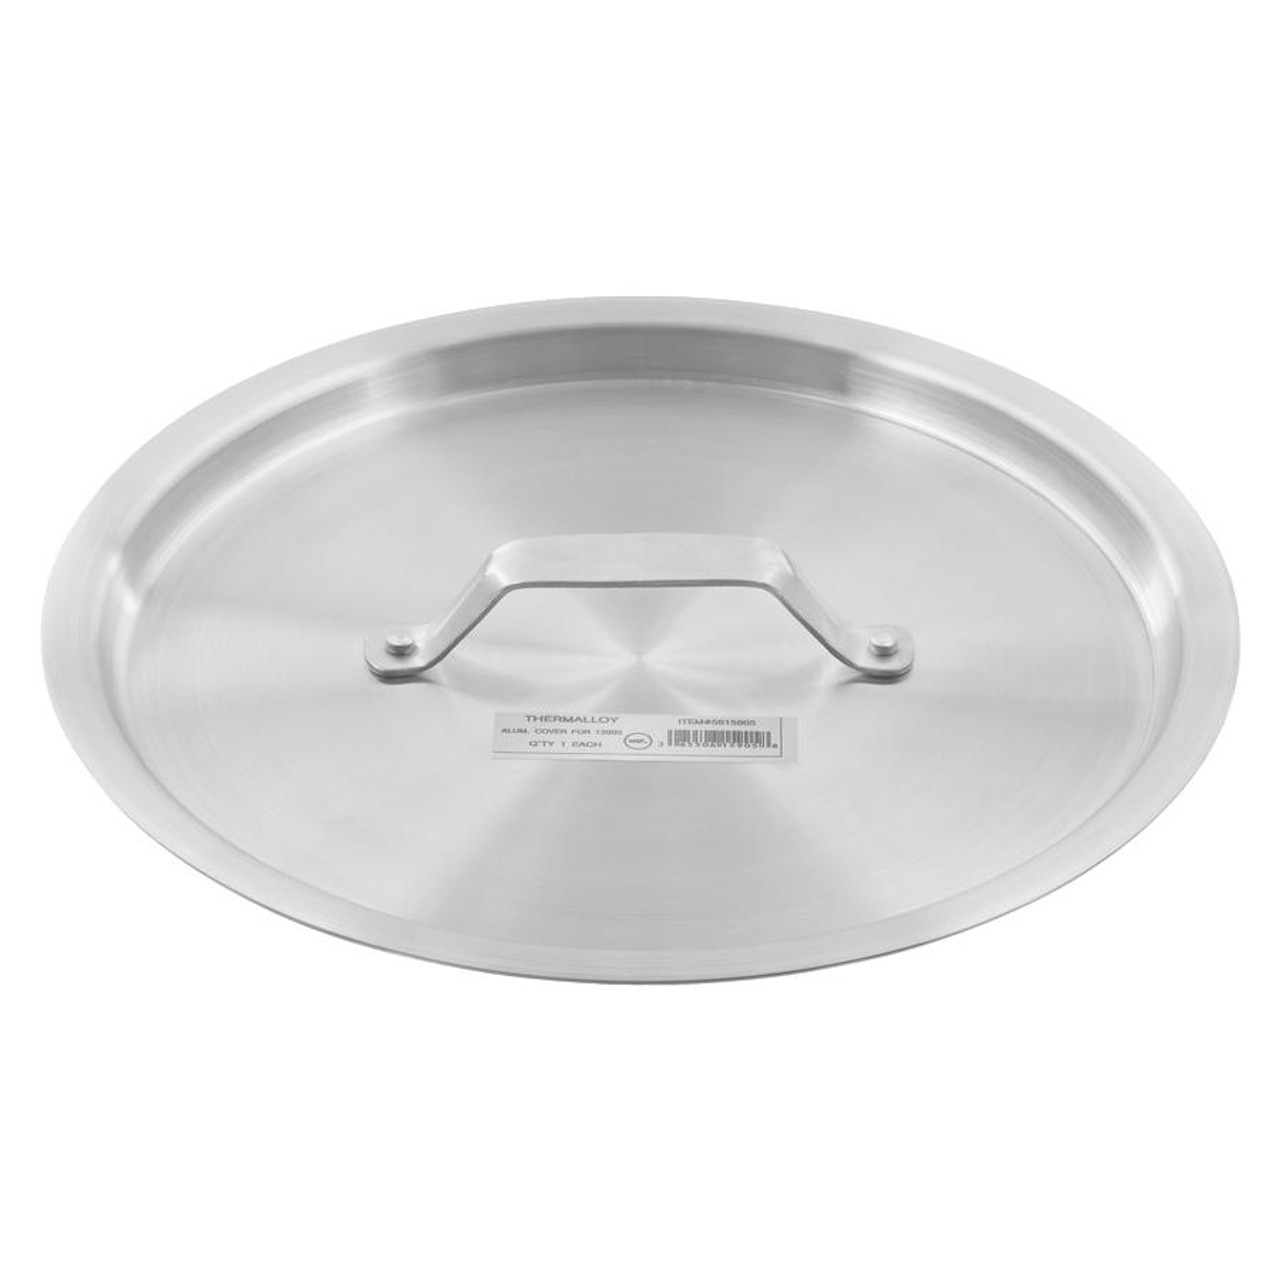 THERMALLOY Aluminium Sauce Pan Lid, 10-Inch - Perfect Fit for Your Sauce Pan 